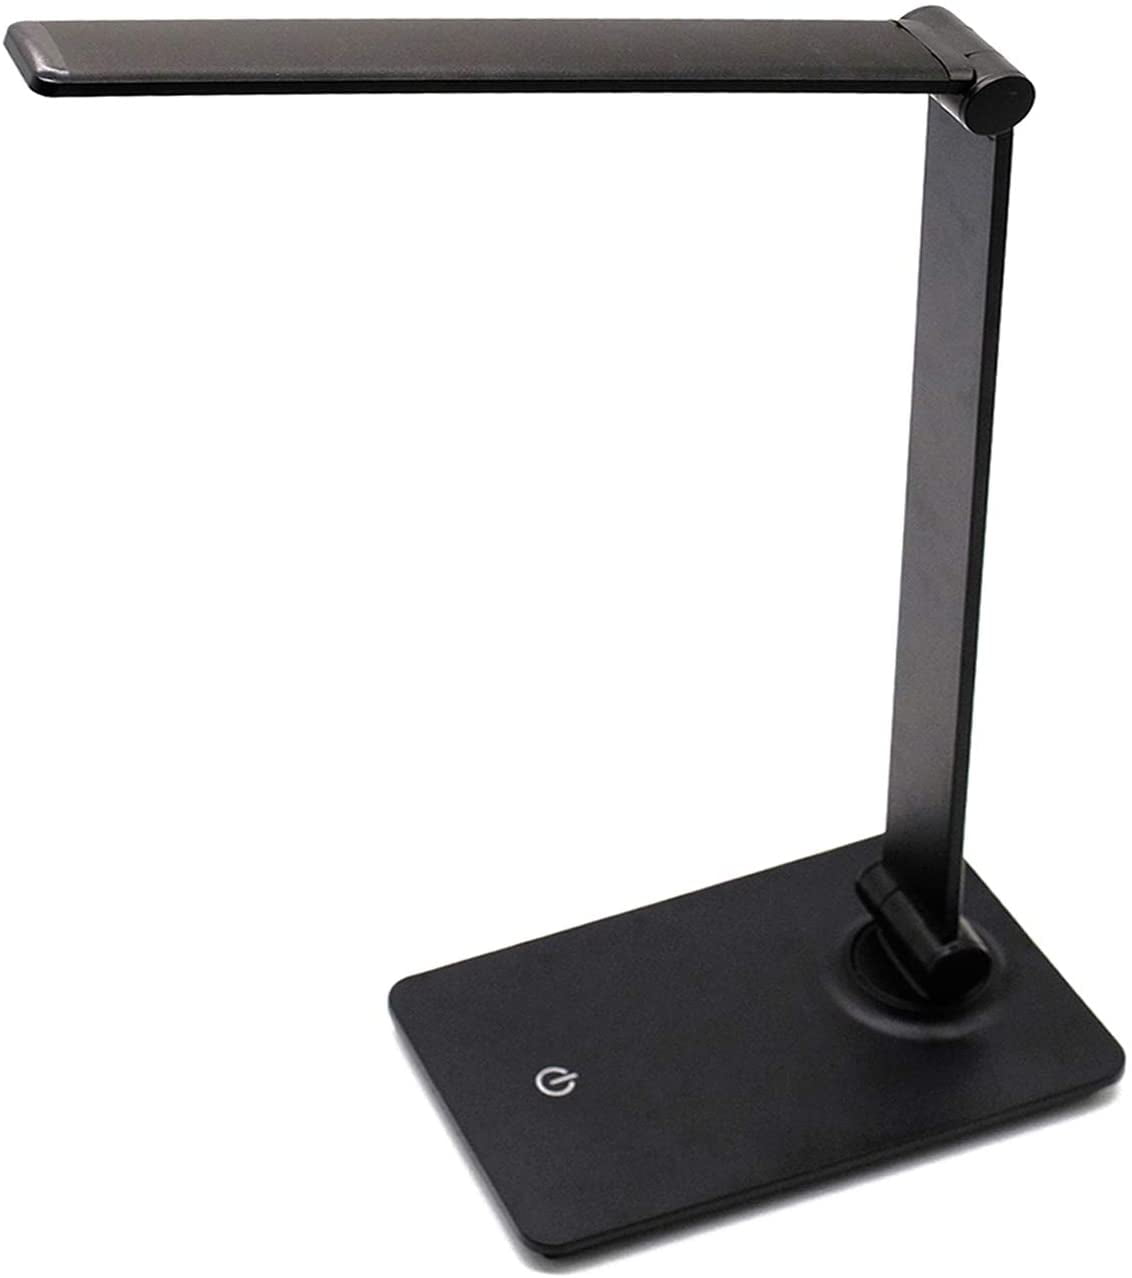 MoKo Smart Touch Stylish Metal Table Lamp Space Gray Rotatable Home Office Lamp with Stepless Brightness/Color Temperature 5V 2.4A USB Charging Port Sleep Mode Memory Function LED Desk Lamp